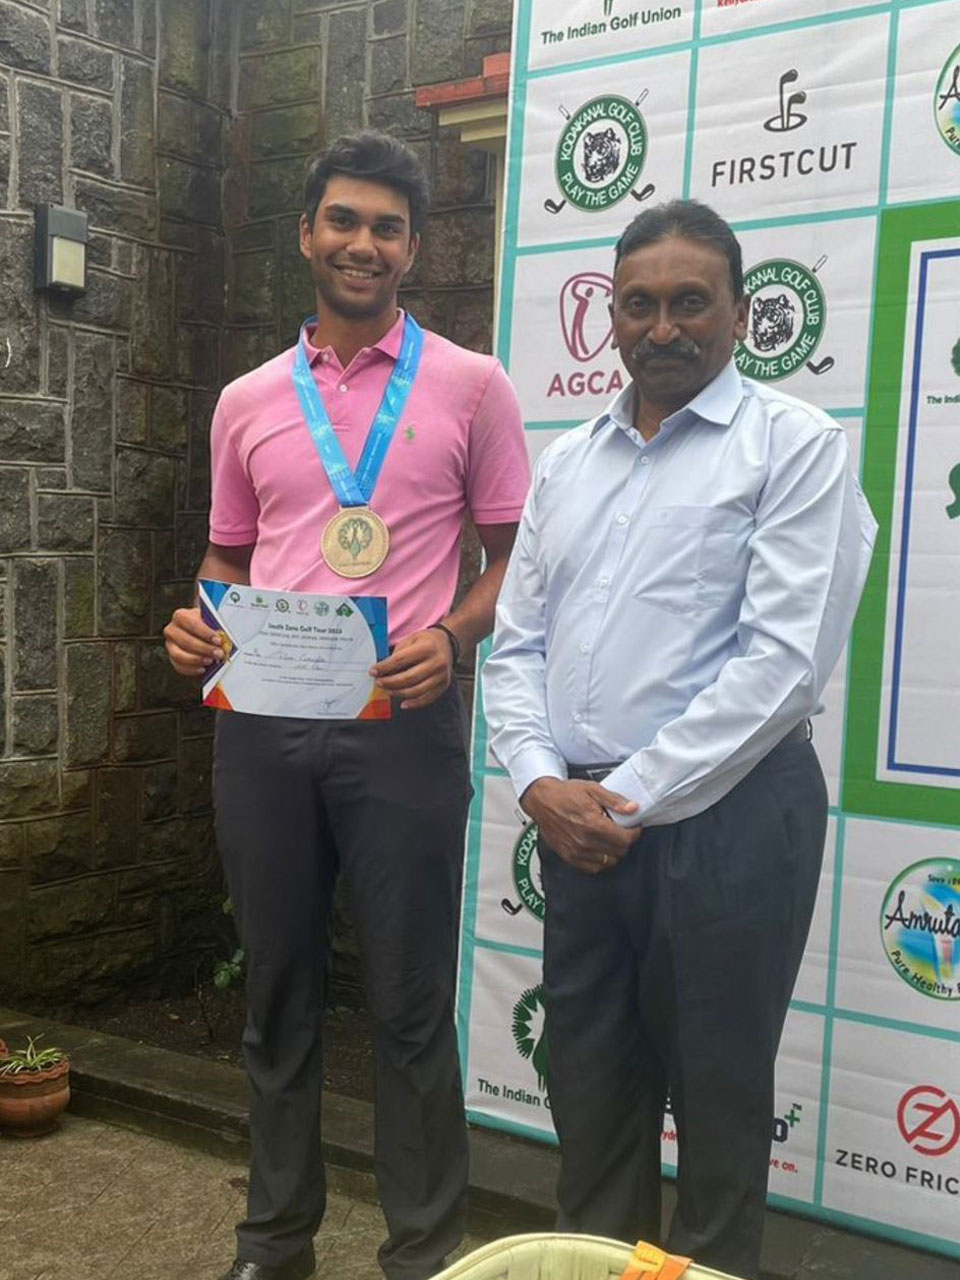 Reon Cariappa finishes 2nd at the South Zone Amateur Championship